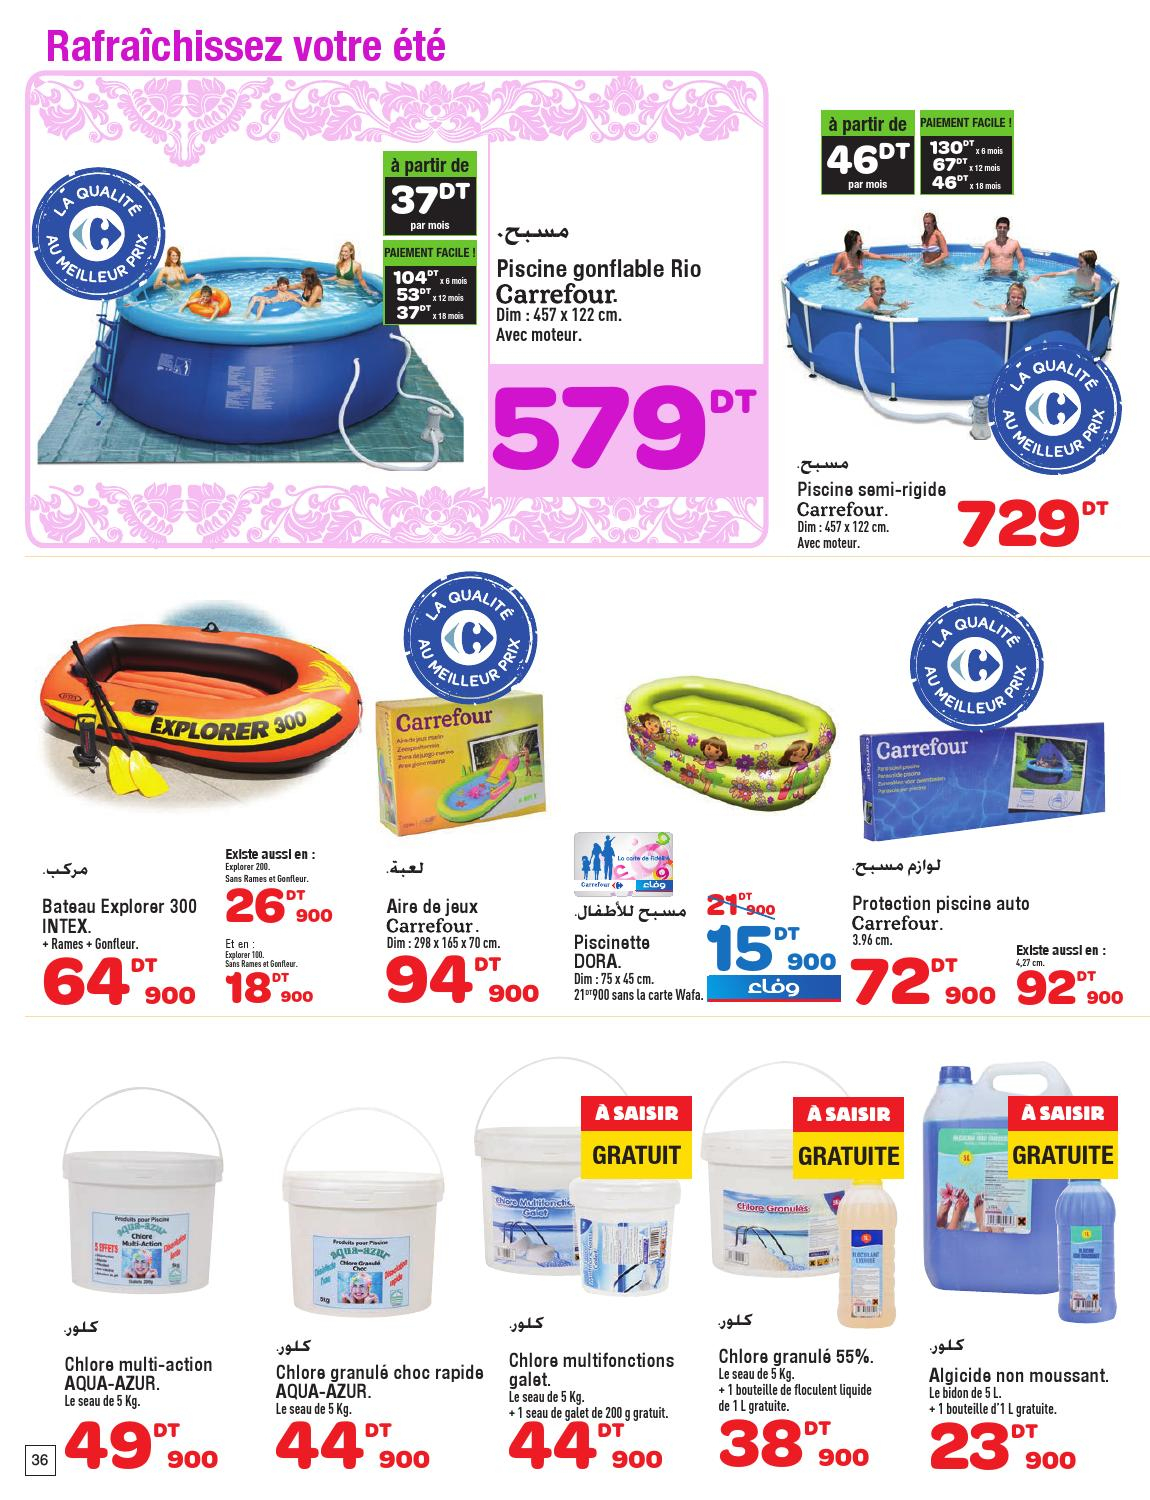 Catalogue Carrefour By Carrefour Tunisie - Issuu intérieur Piscine Gonflable Carrefour